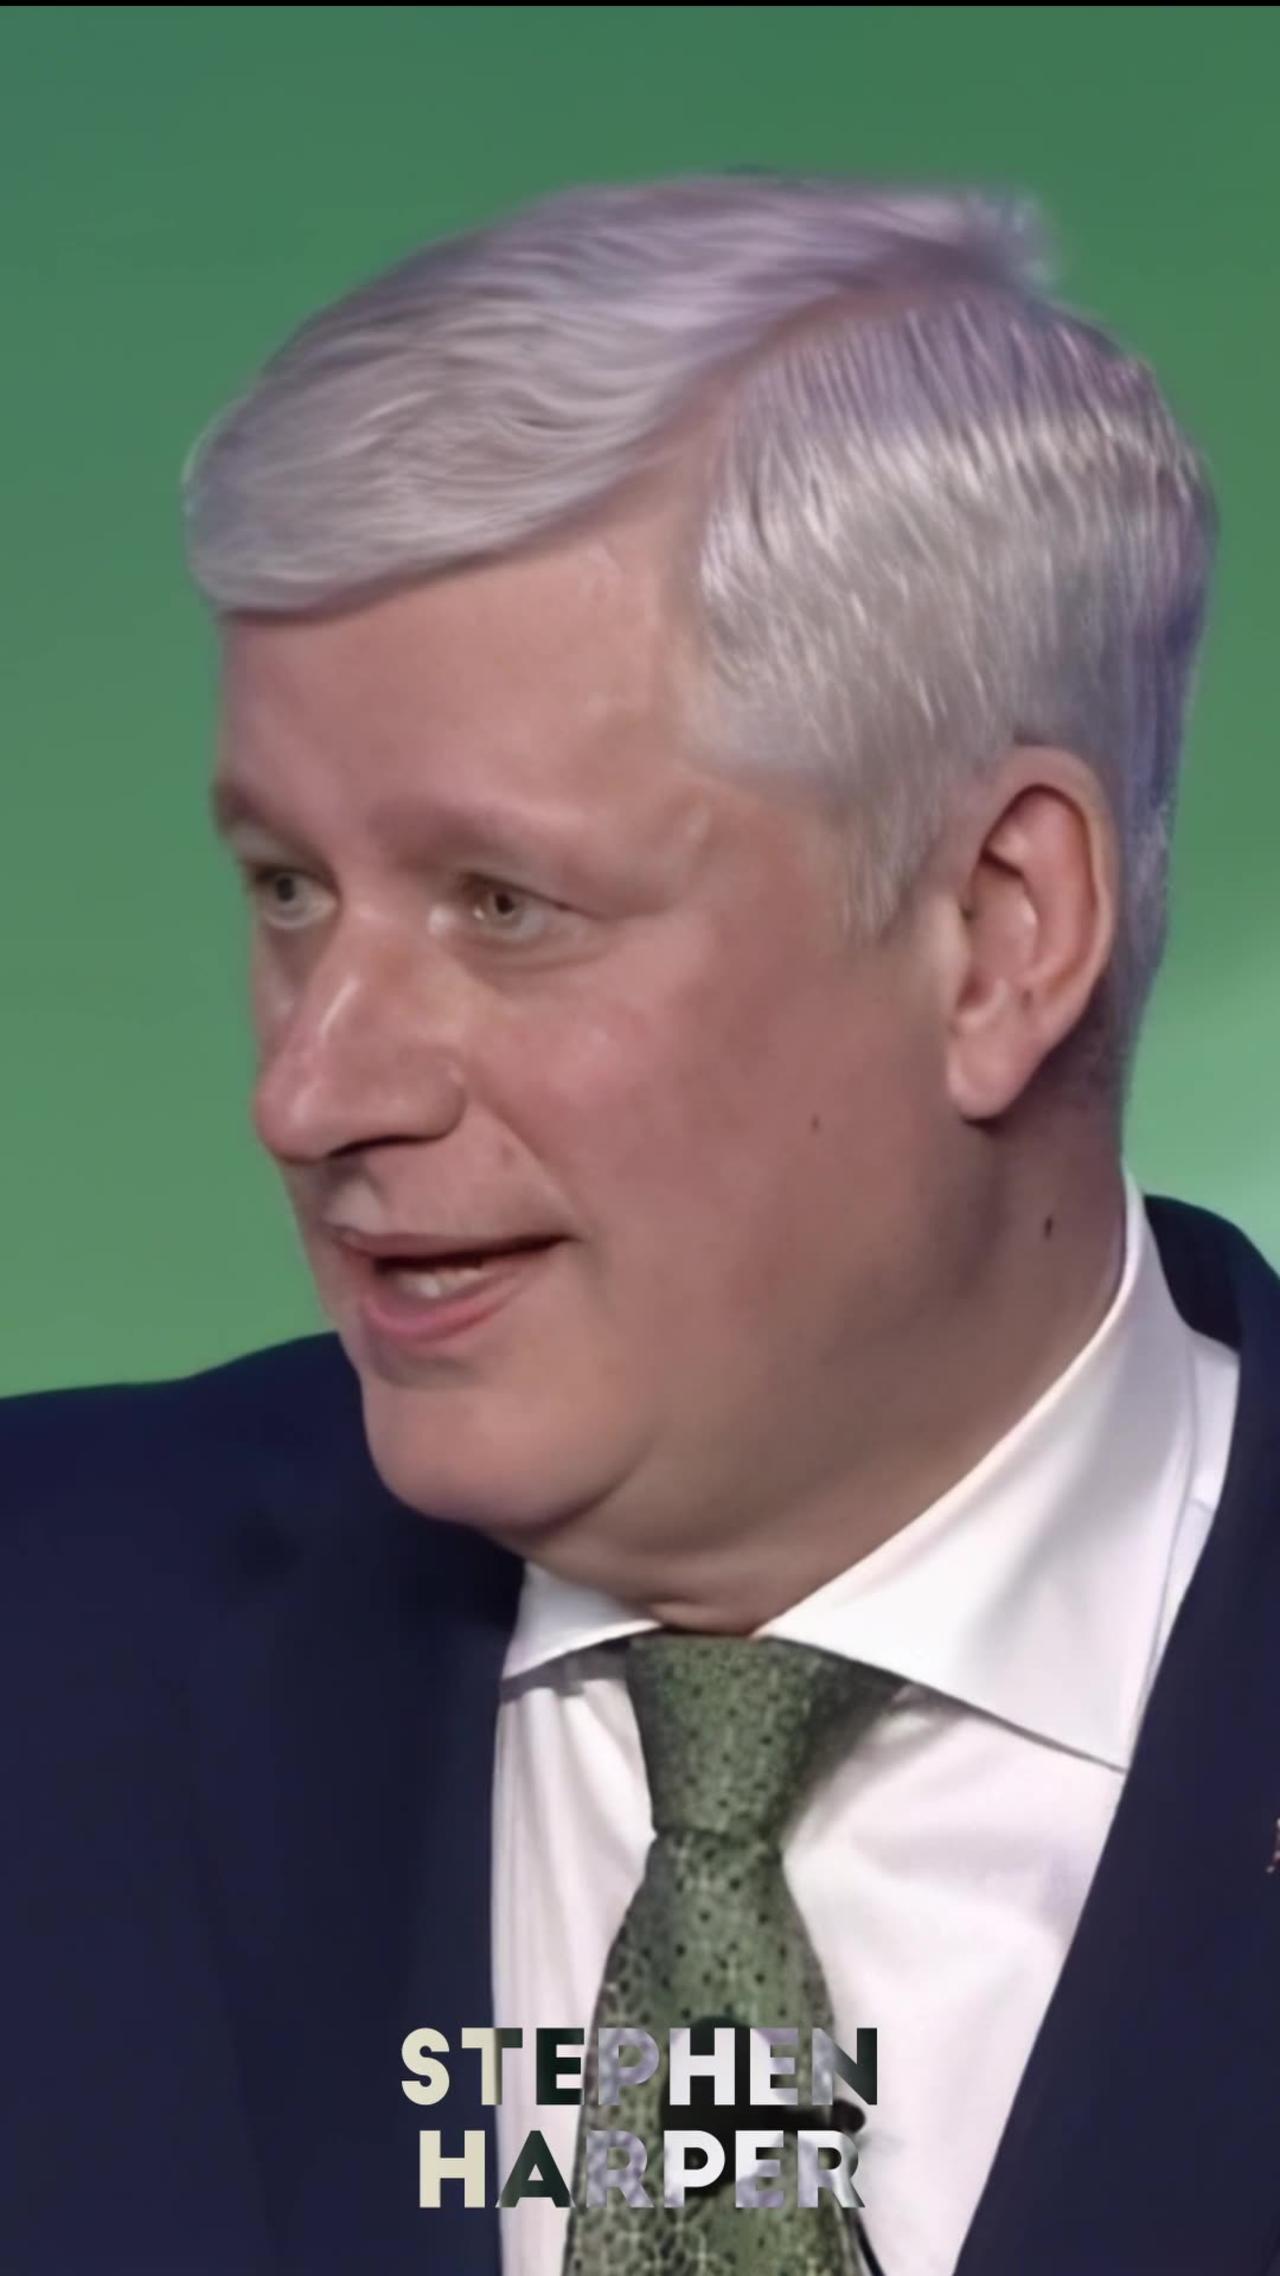 Stephen Harper, If You Were To Read Liberal Media Around The World